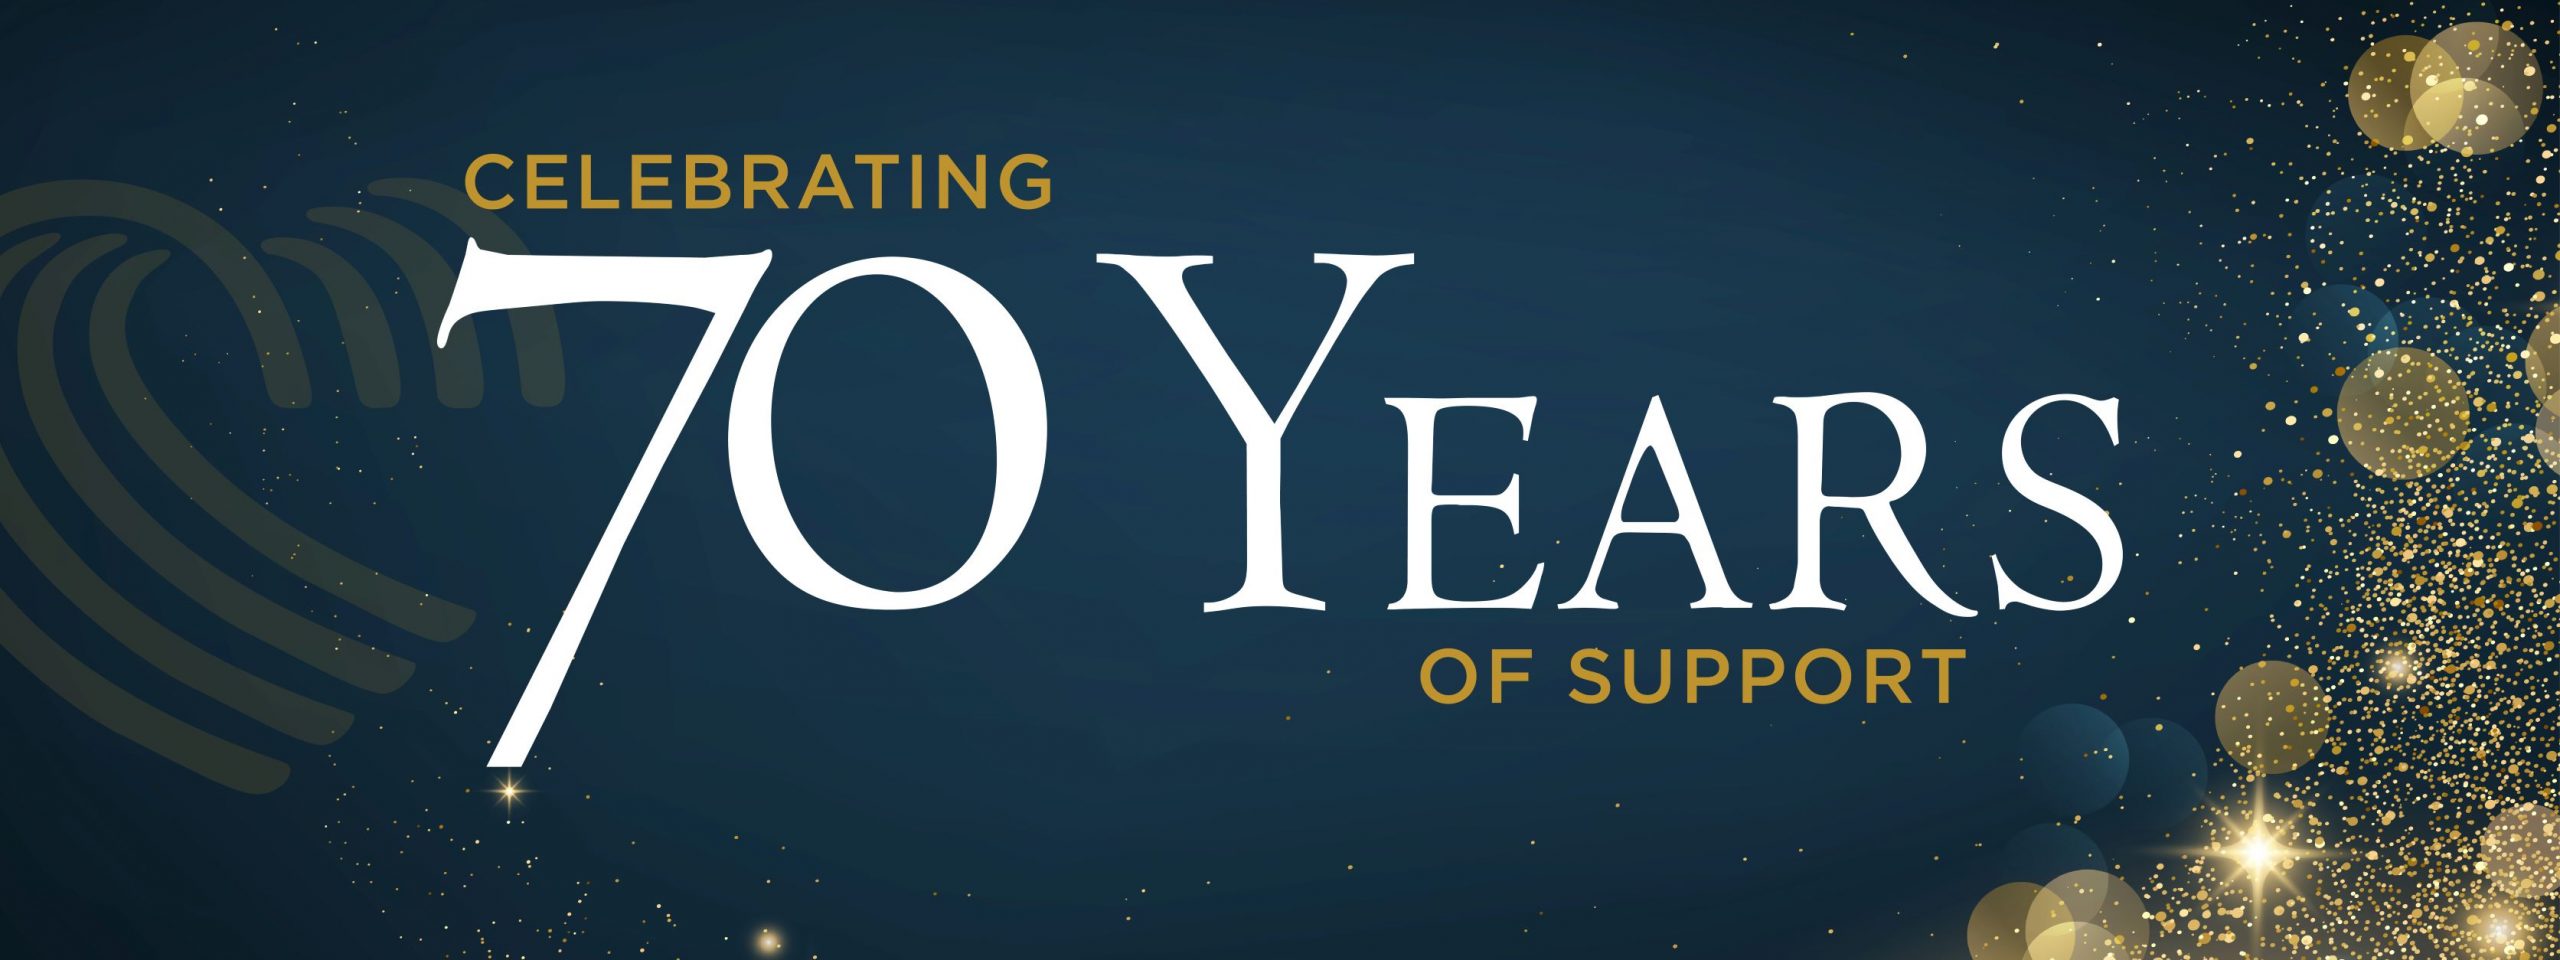 Celebrating 70 Years of Support